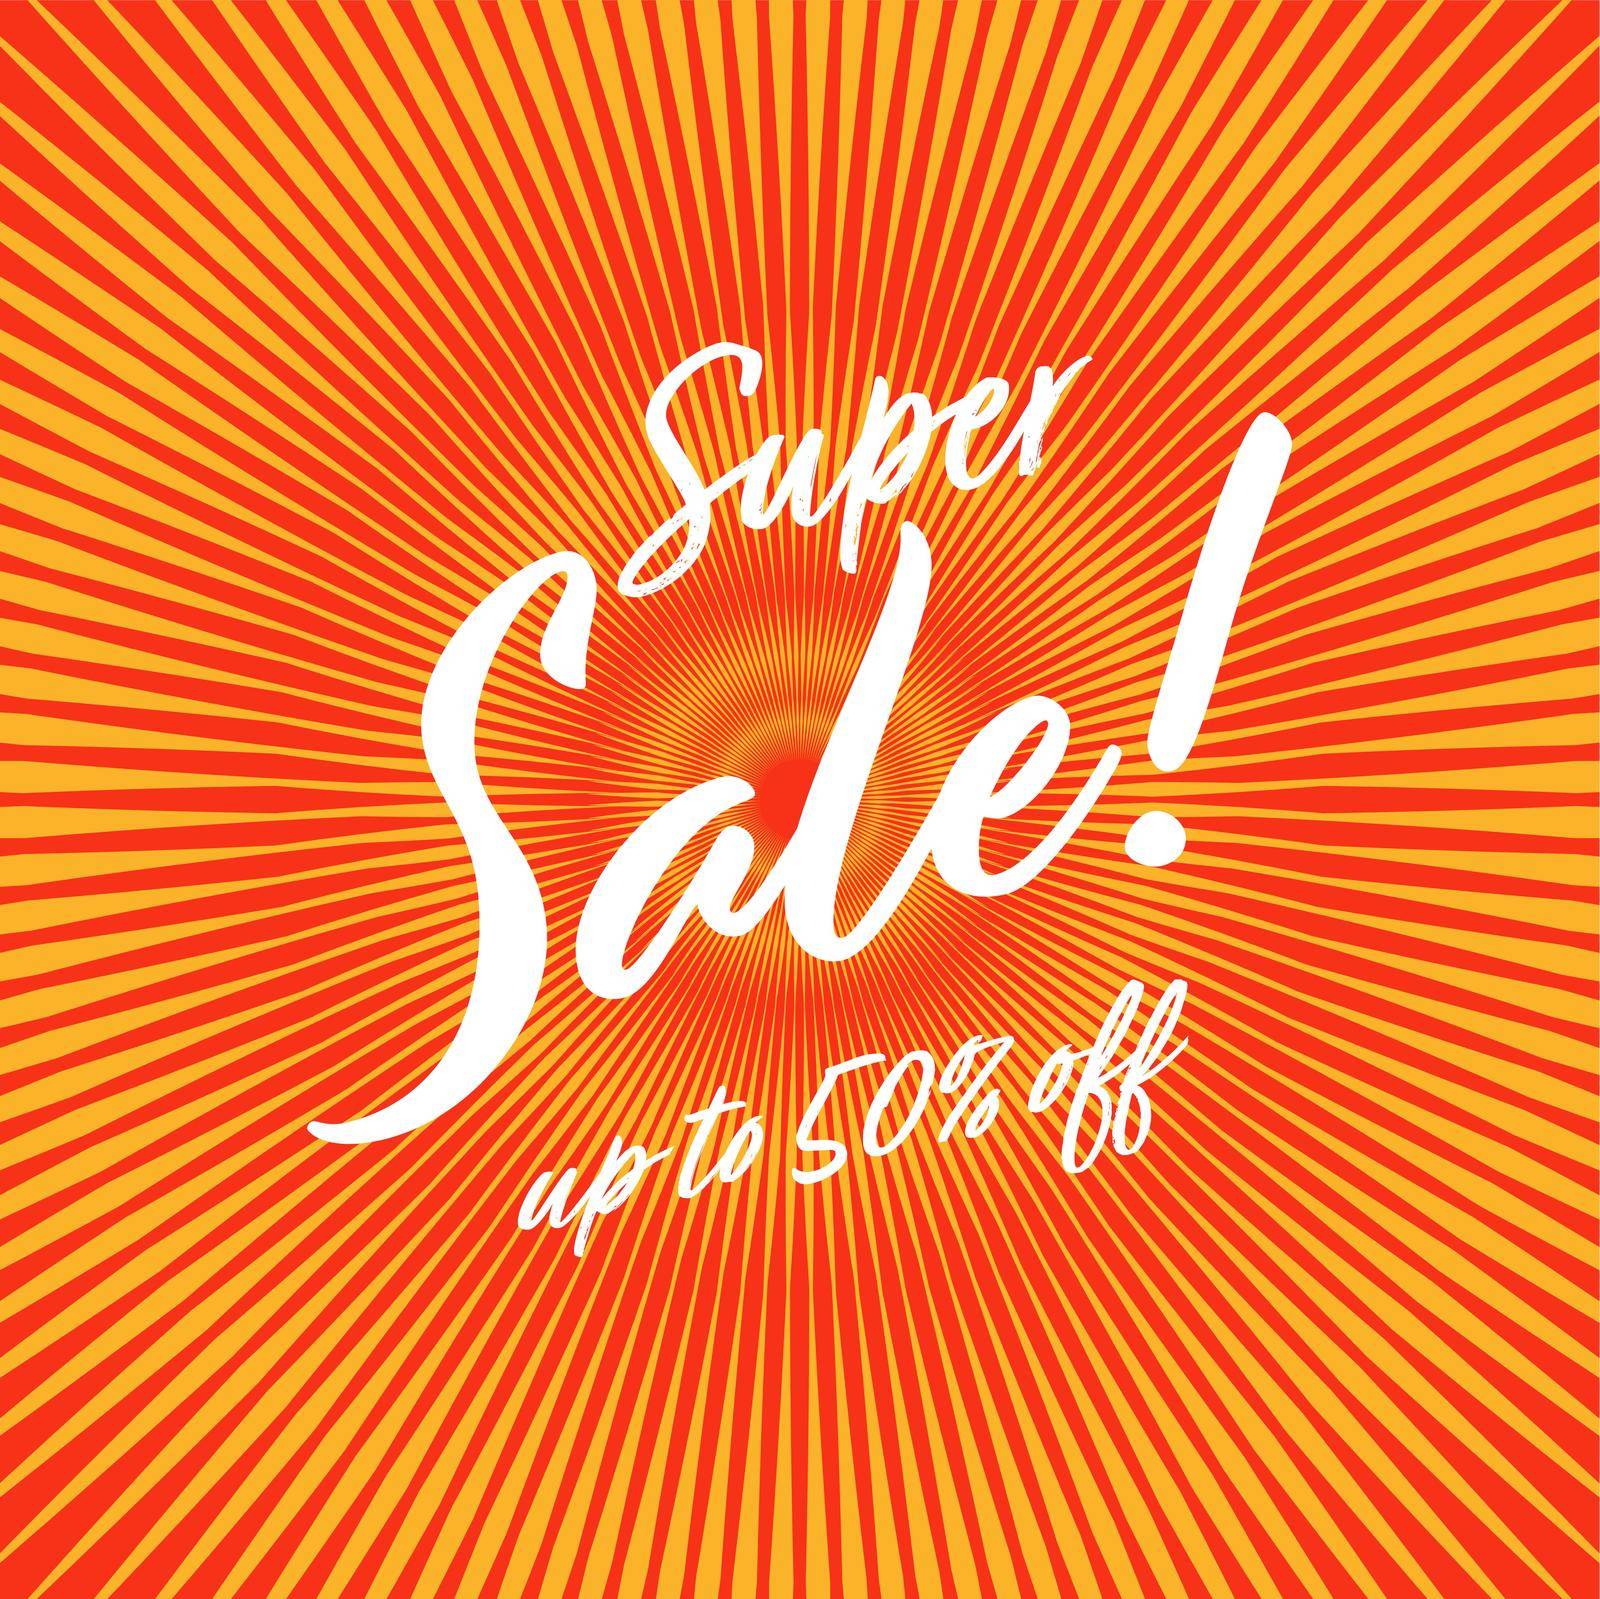 Super sale up to 50 percent off banner.